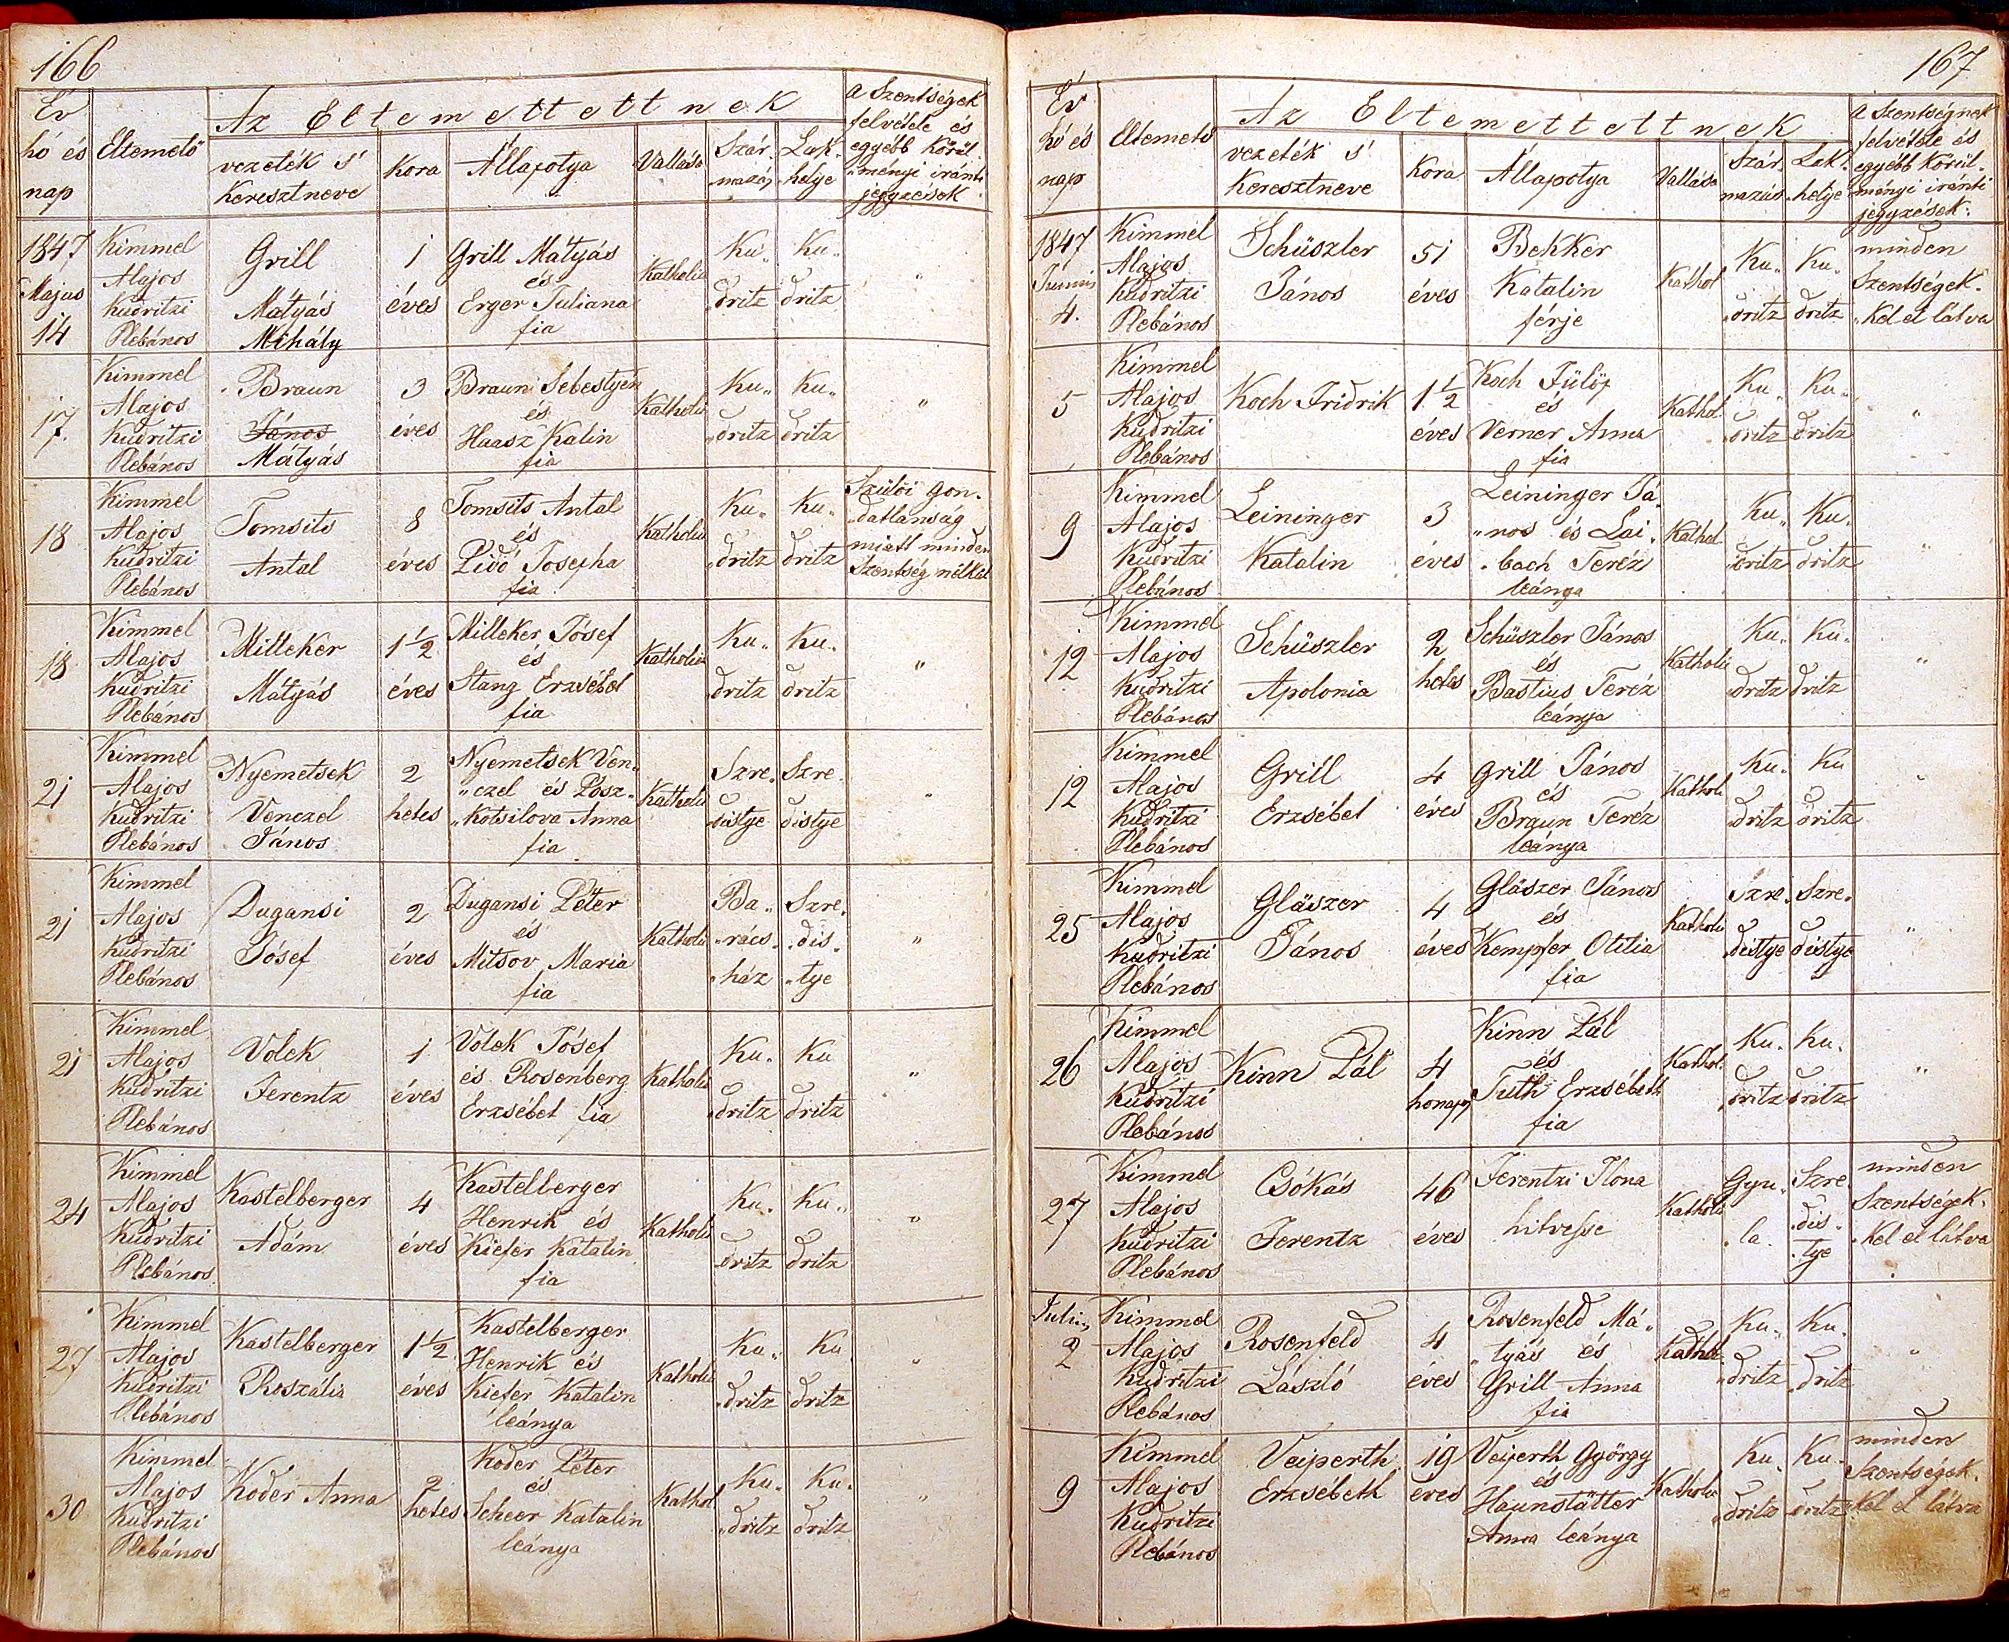 images/church_records/DEATHS/1829-1851D/166 i 167